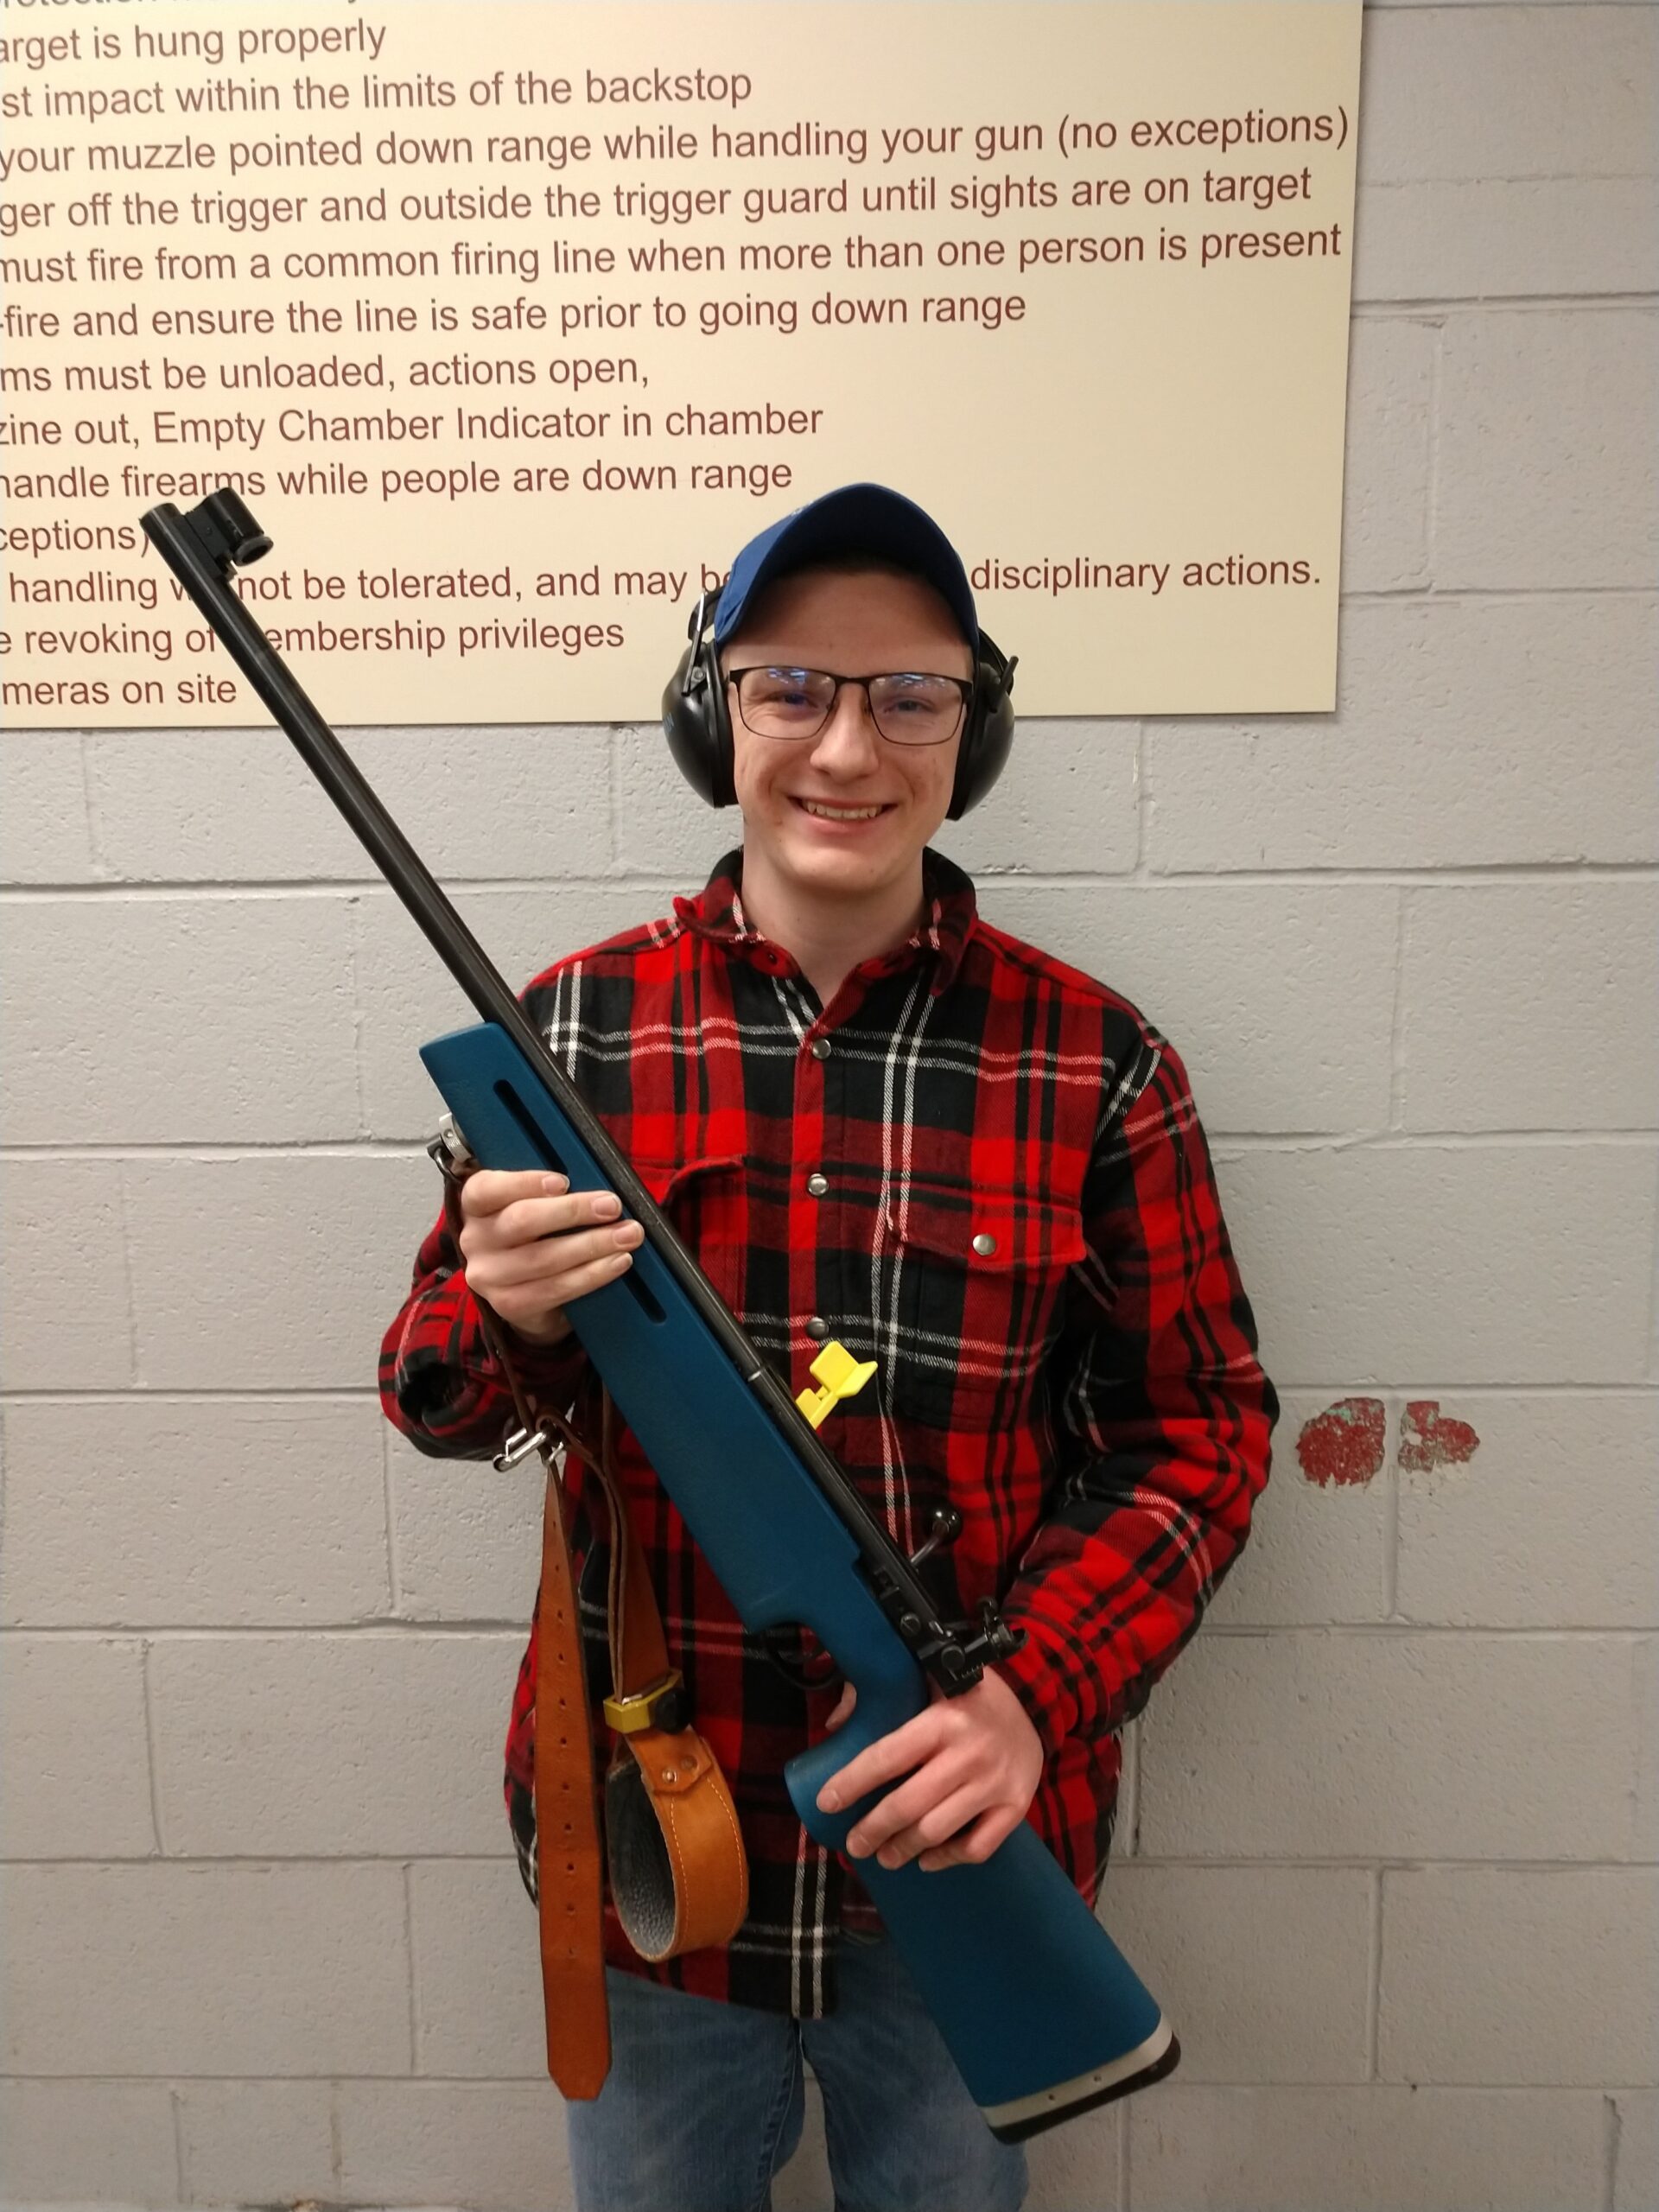 Dylan Drouillard completes requirements for Expert Rifleman